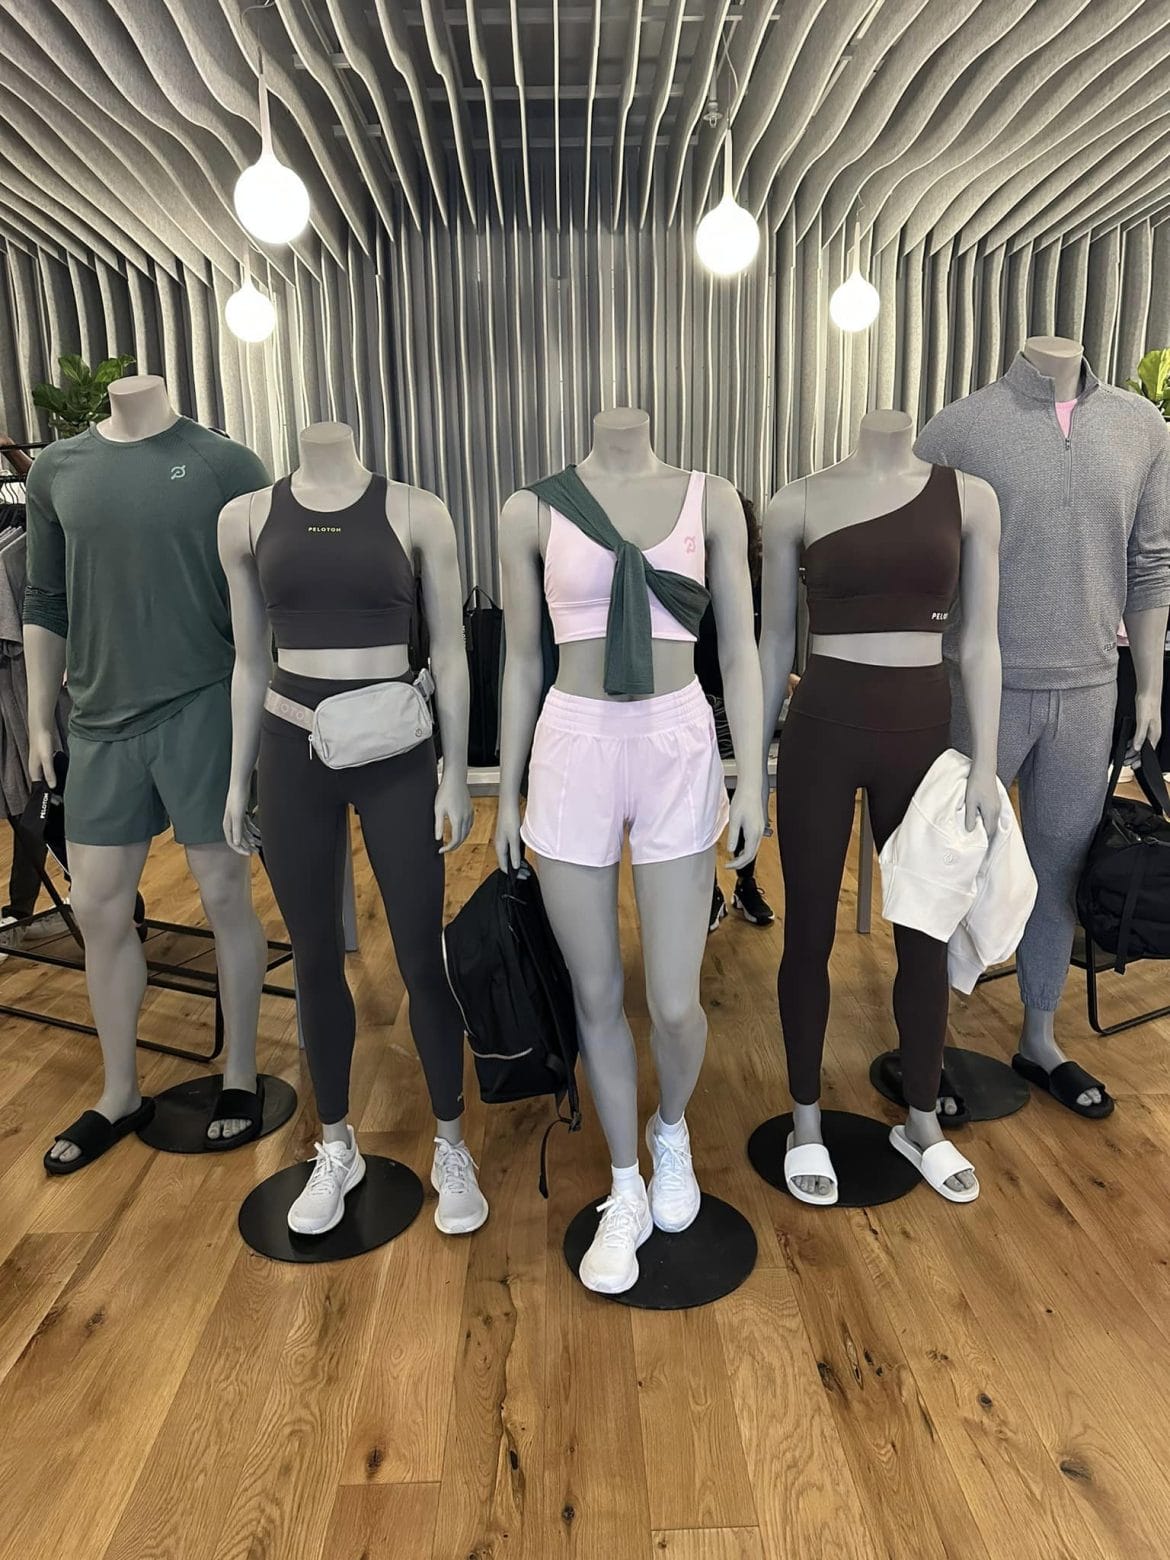 lululemon Lincoln Park Events - 3 Upcoming Activities and Tickets